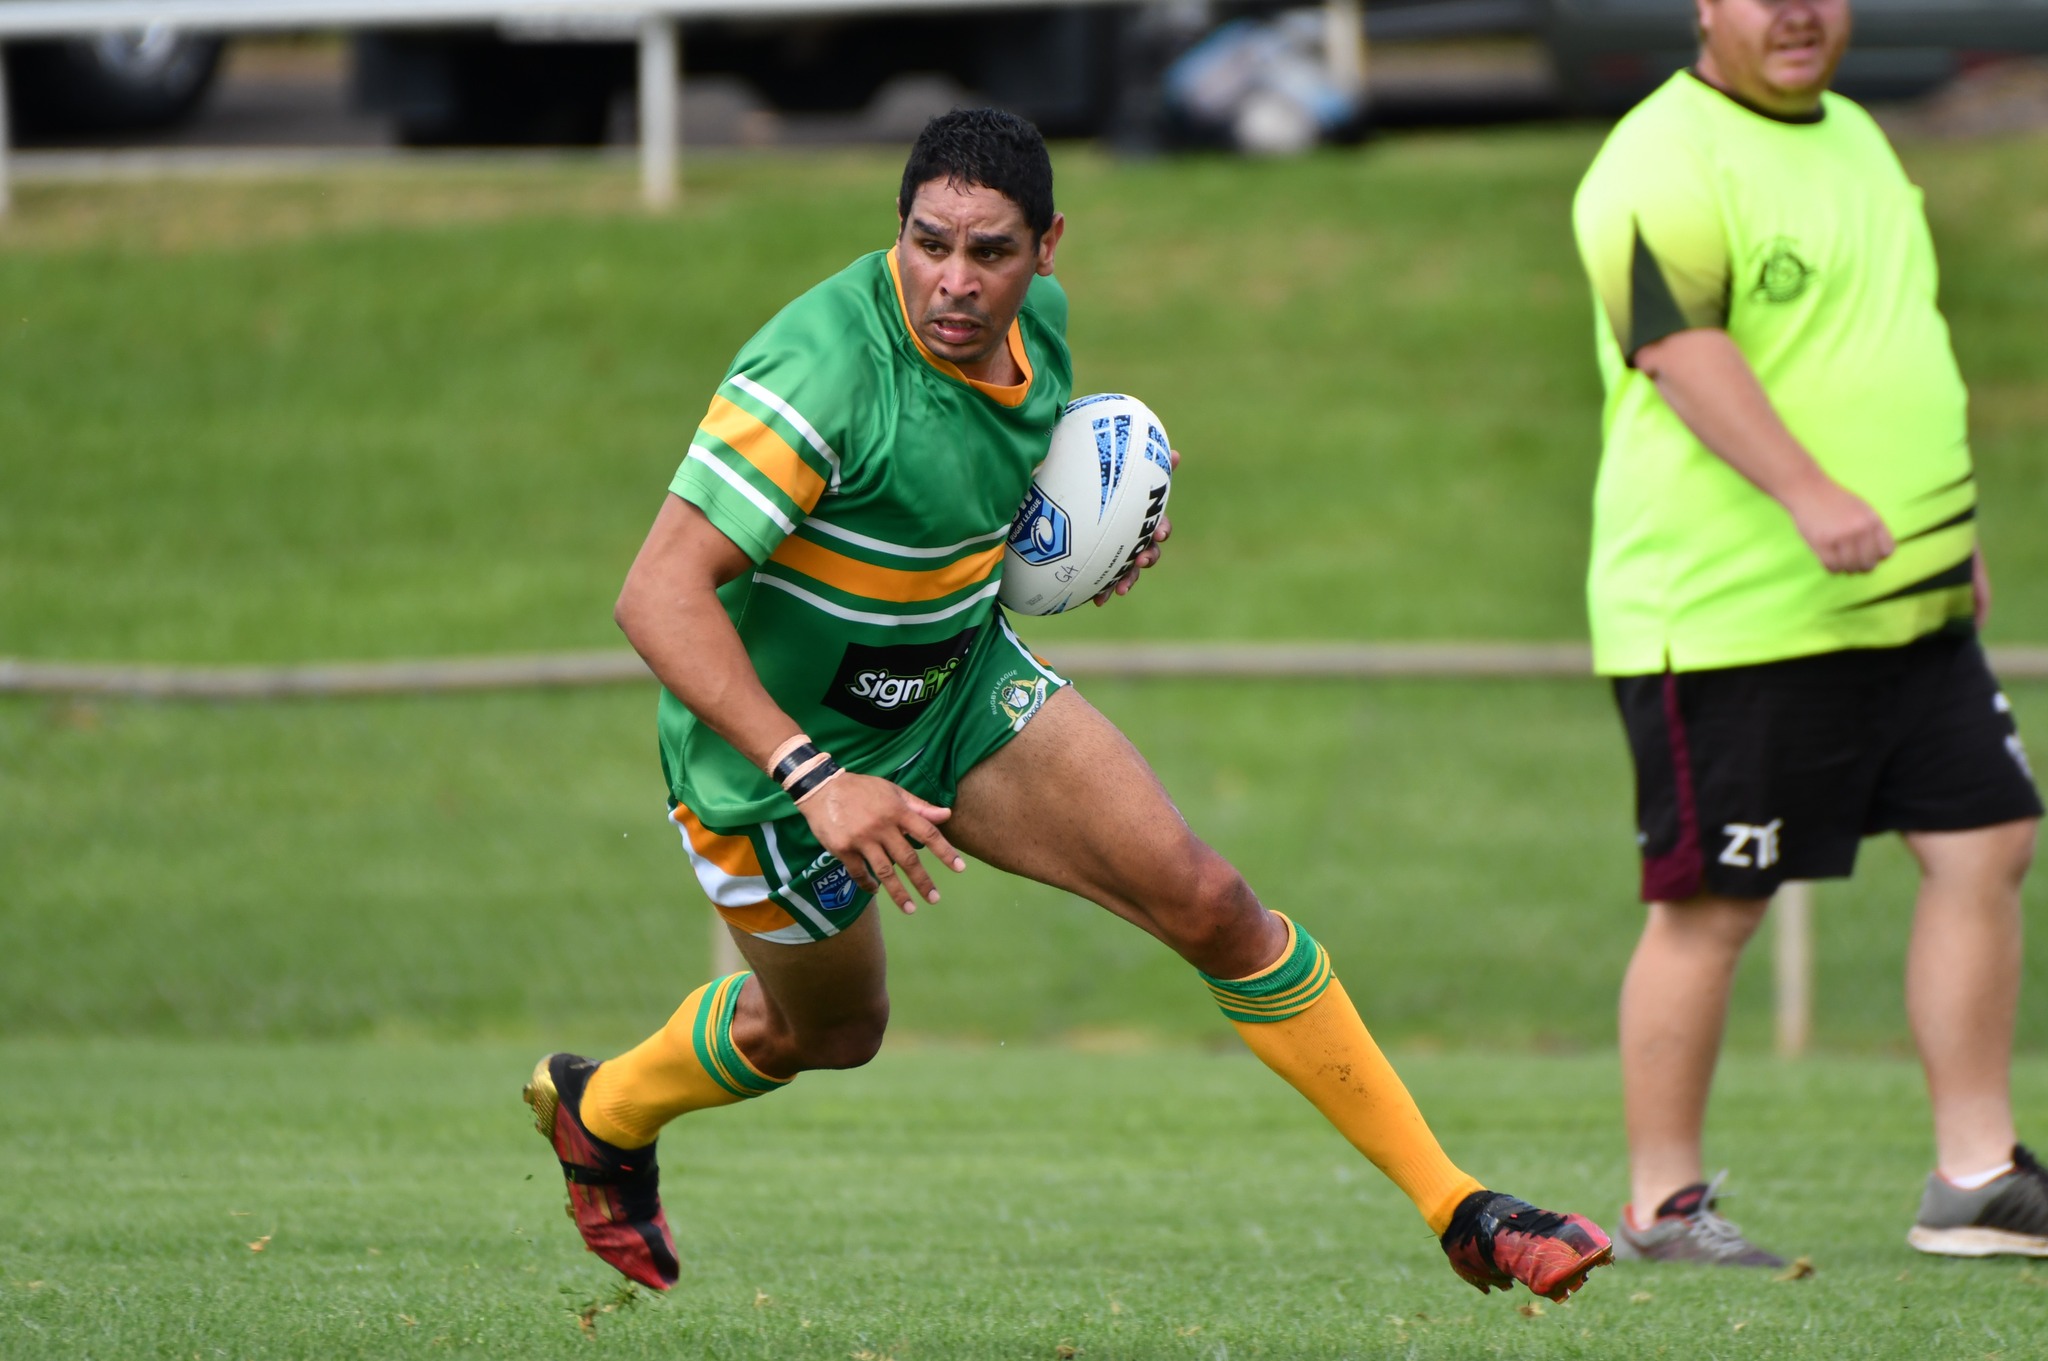 Kangaroos give North Tamworth a scare but the defending champions get the job done in round one